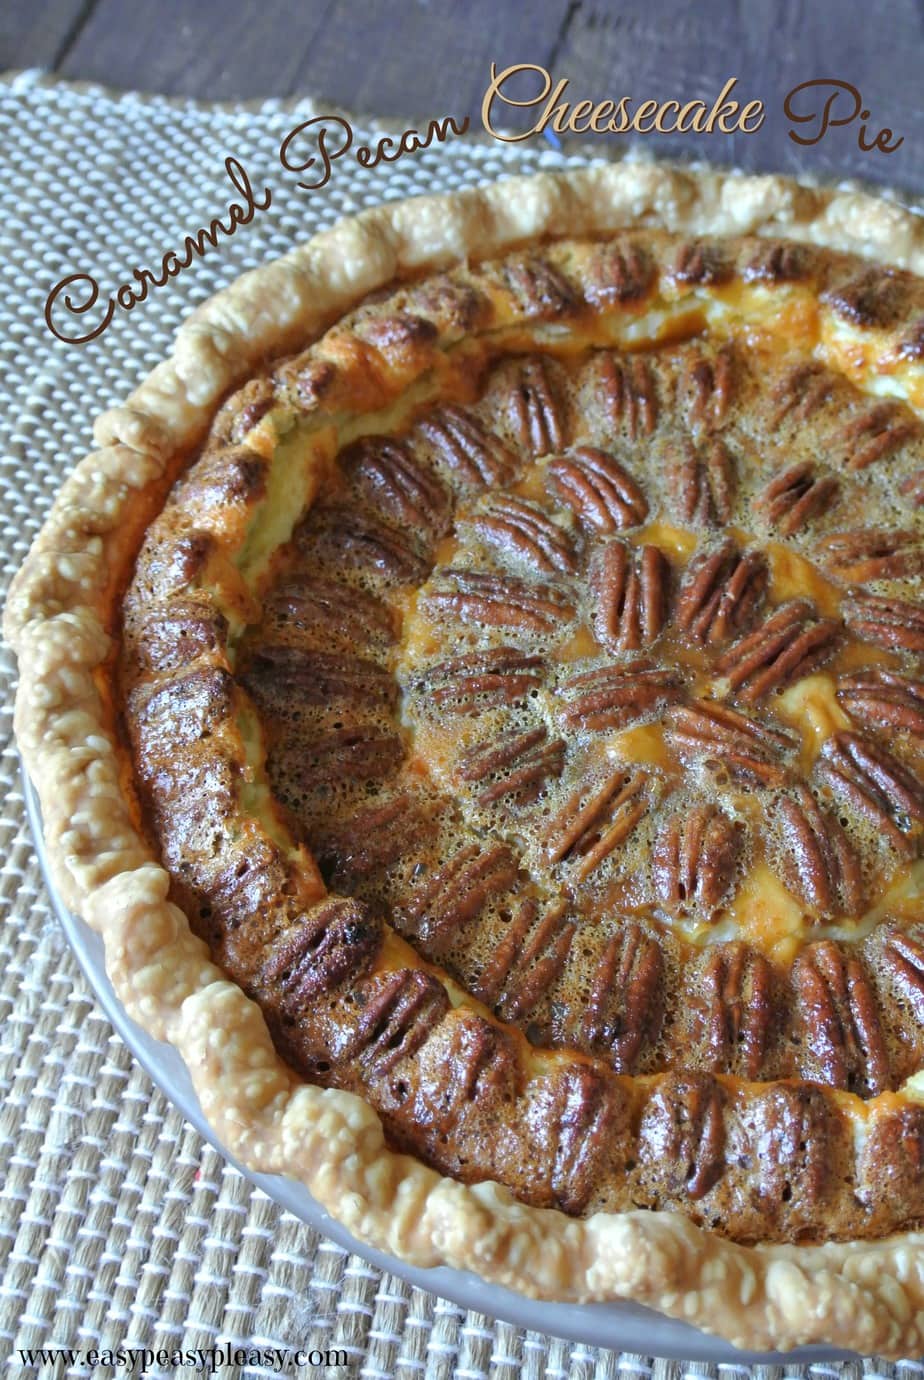 Caramel Pecan Cheesecake Pie is the best of of both worlds! Cheesecake and Pecan Pie